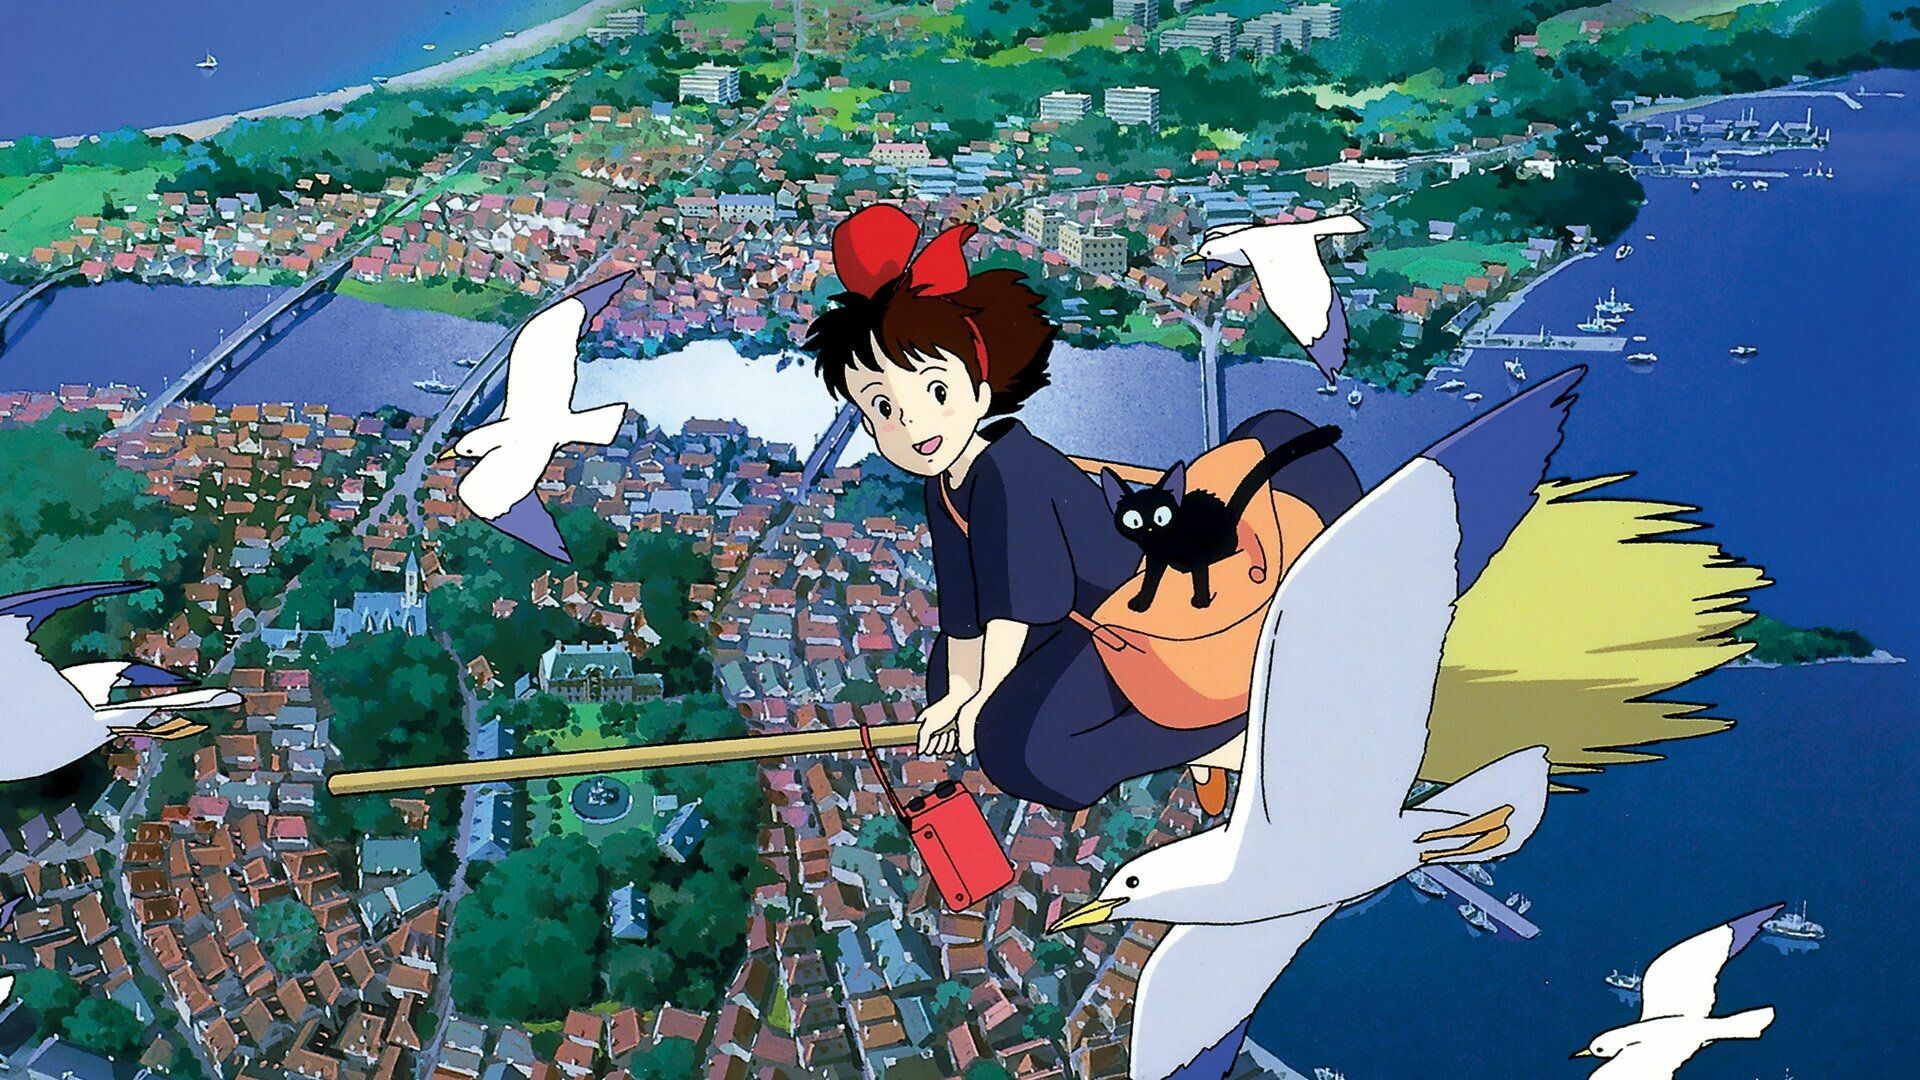 Kiki's Delivery Service: The film was 1989's highest-grossing film in Japan, Anime. 1920x1080 Full HD Background.